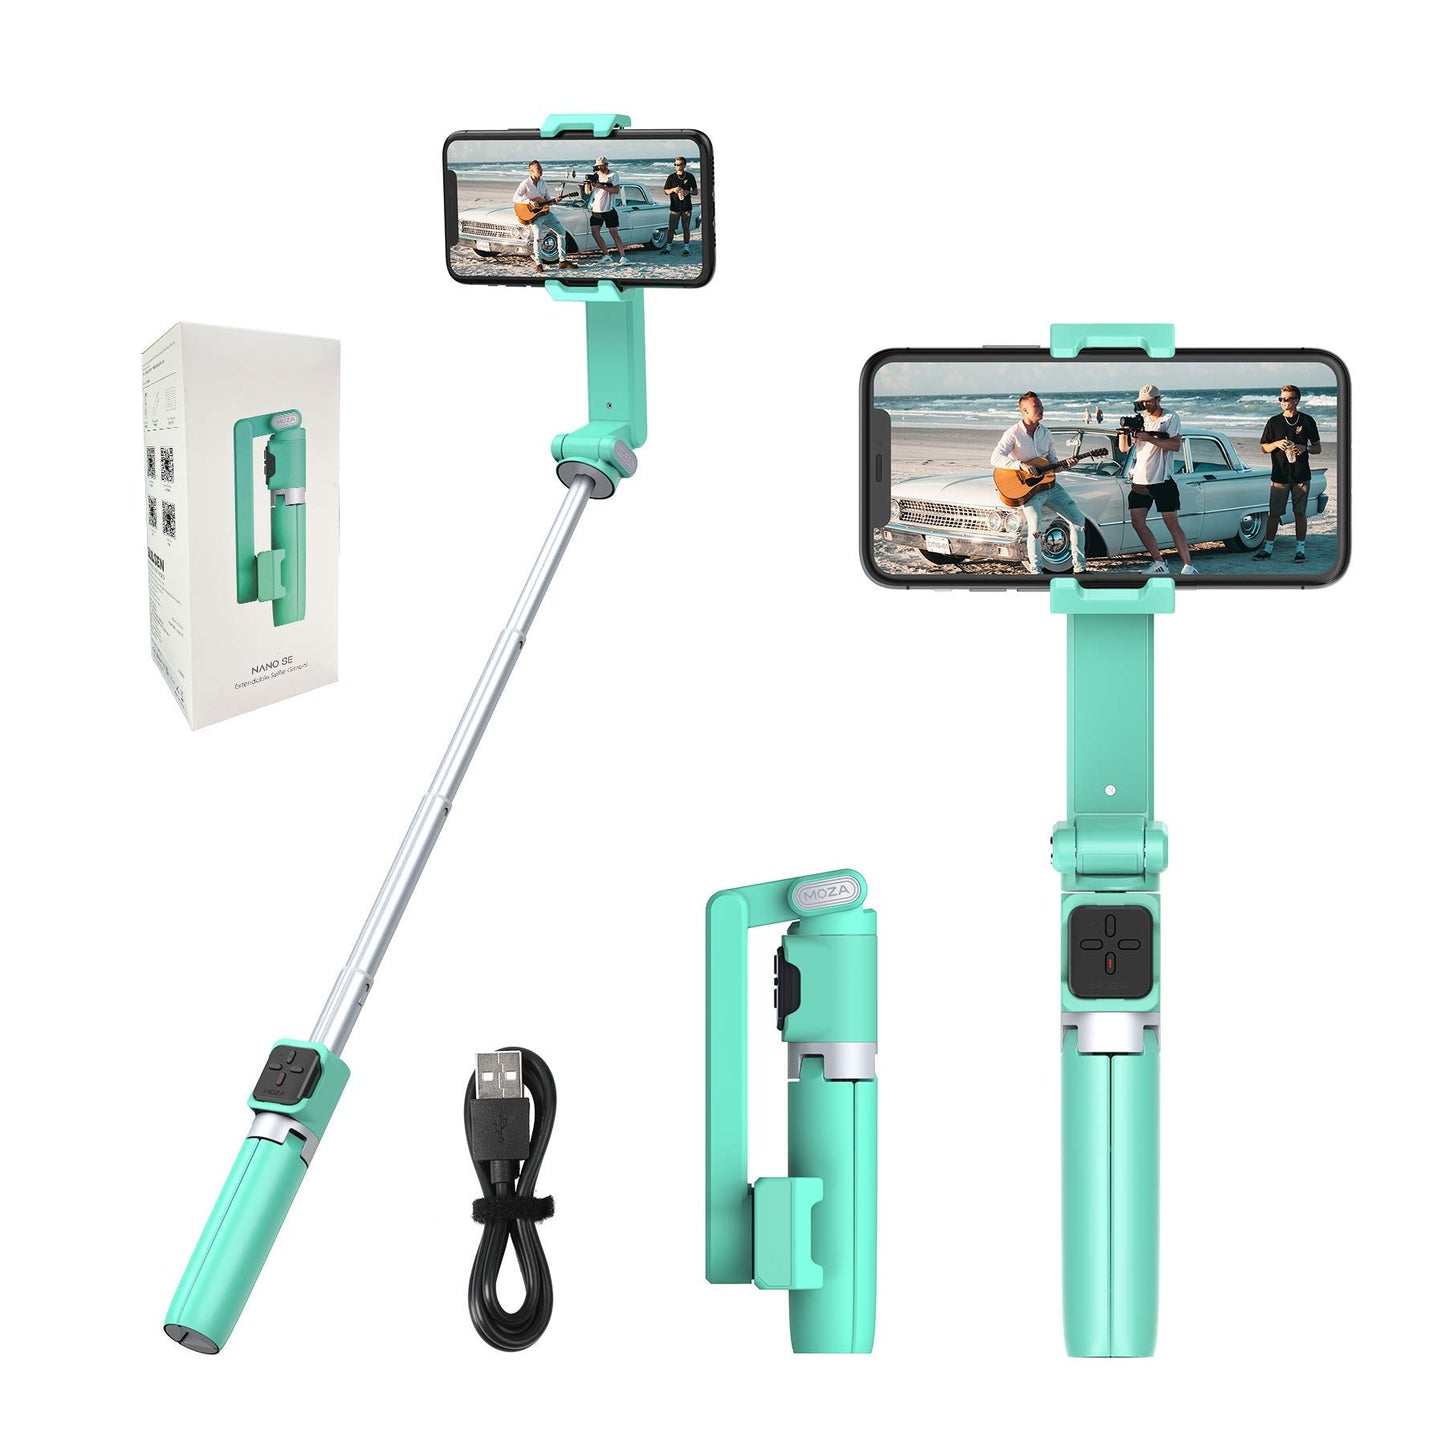 Moza Nano SE Phone Selfie Stabilizer, Extendable Anti-Shake Smartphone Gimbal for Shooting, Photography, Livestream, Youtube Extendable Bluetooth Remote Control with Tripod, (Green, Black)